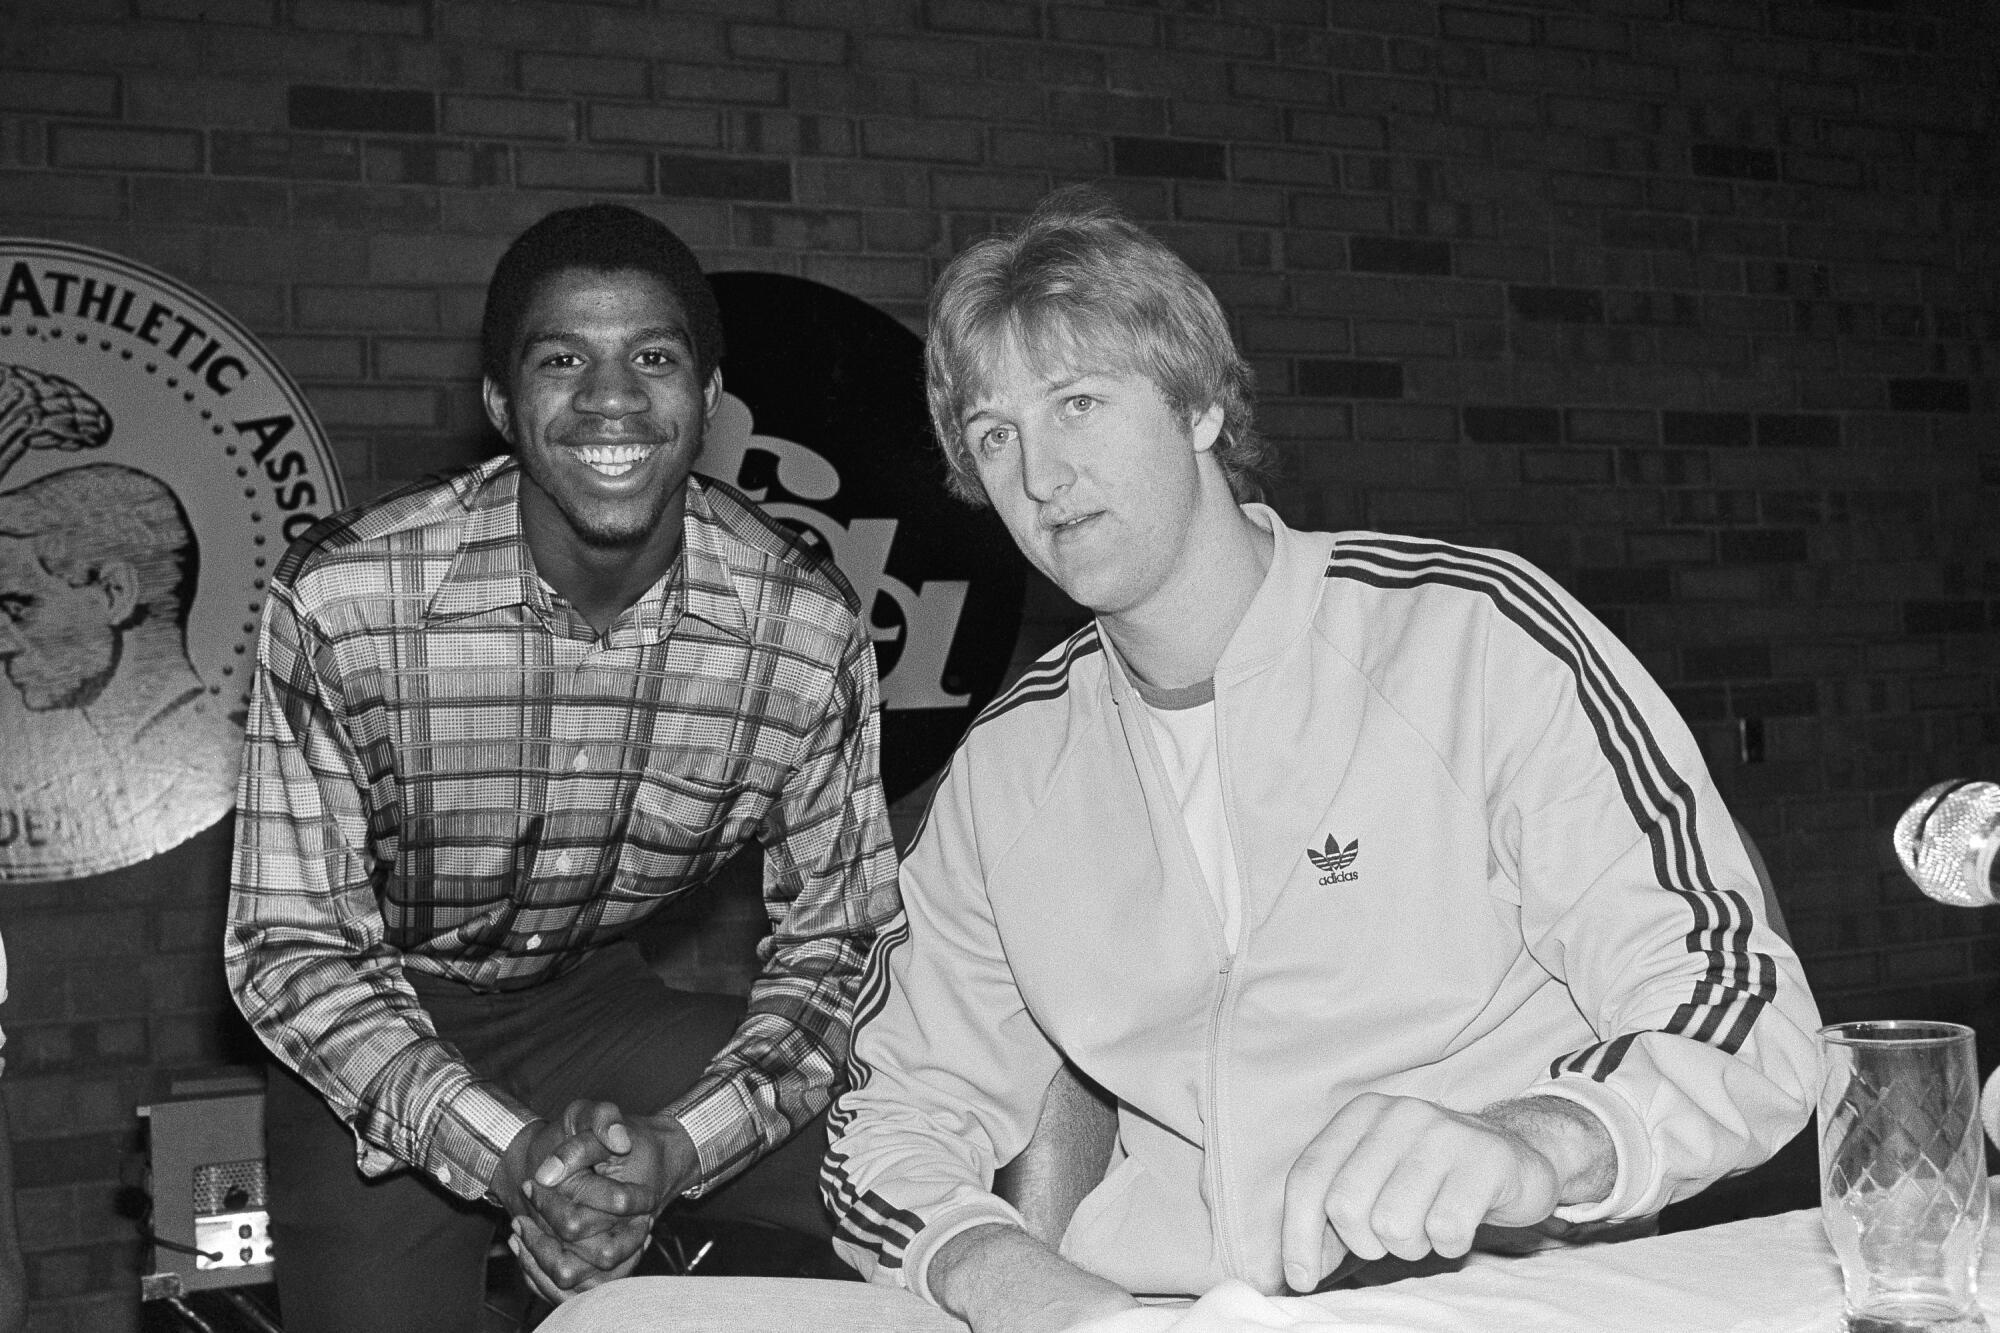 Magic Johnson and Larry Bird in March 1979 in street clothes.